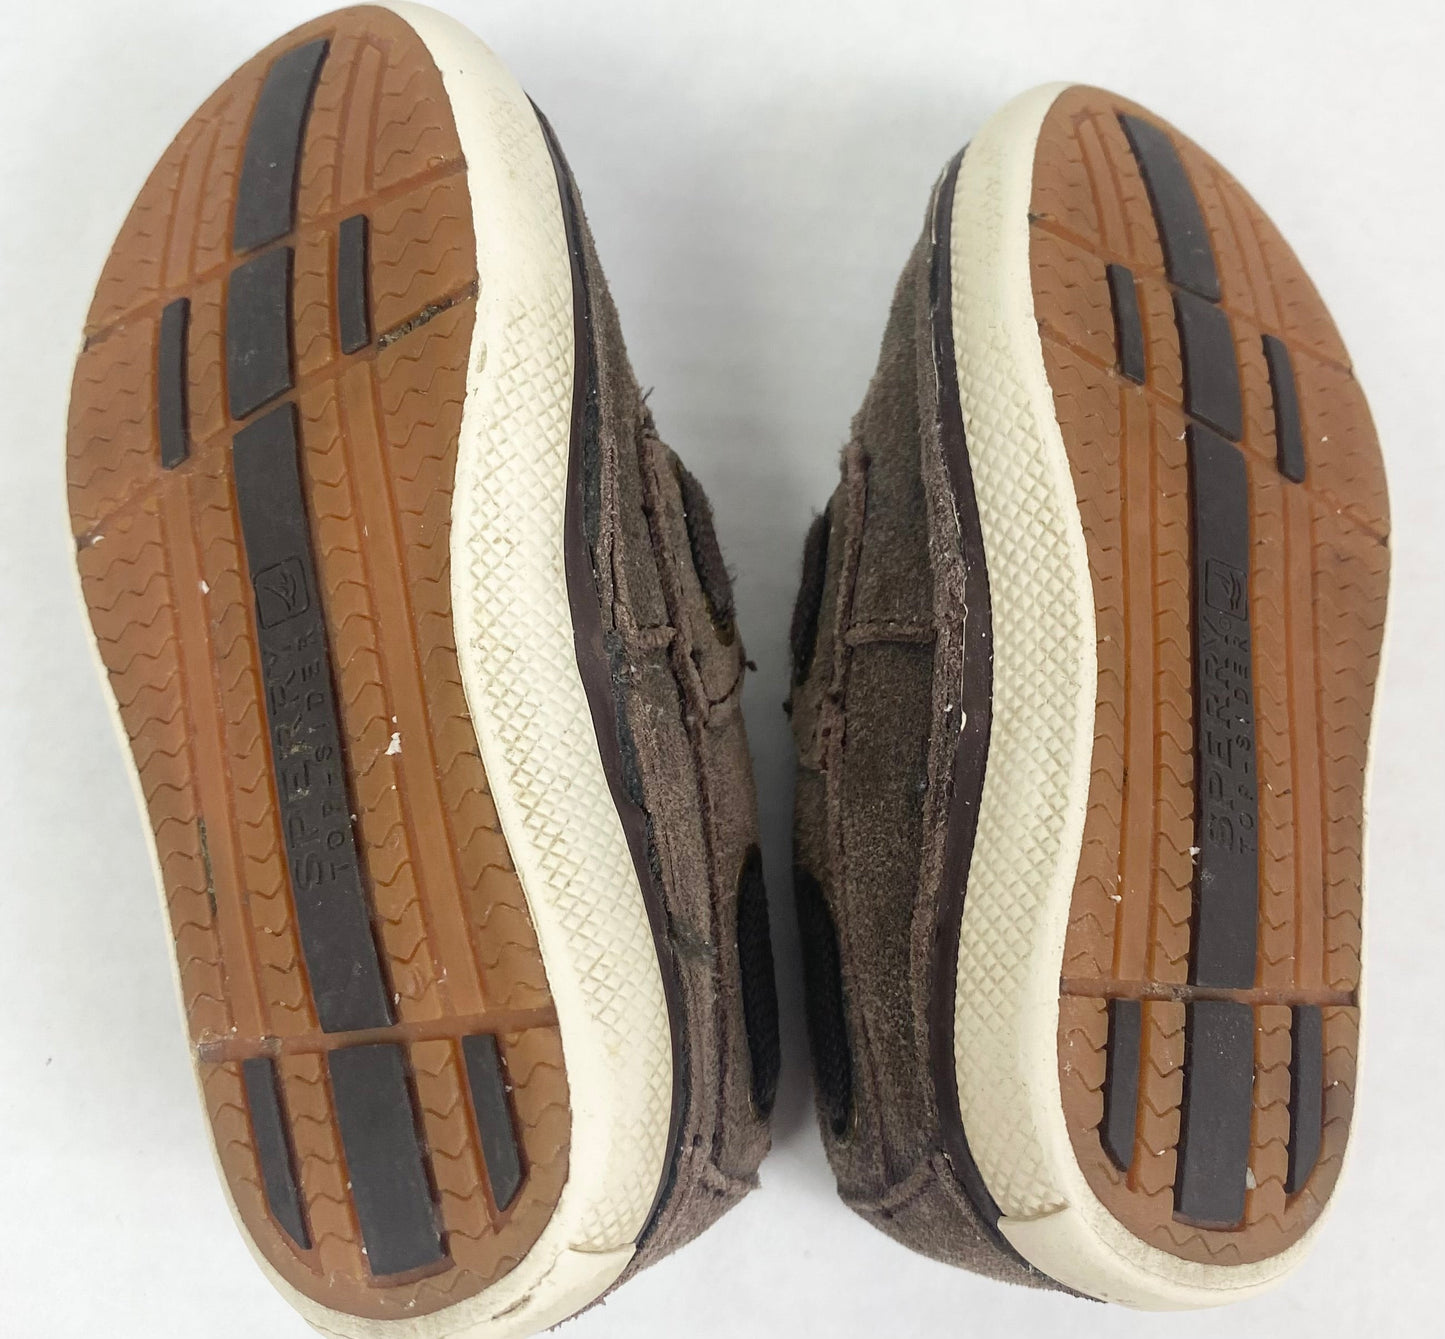 Shoes Toddler Sz 6 Sperry Brown Top Siders w/ velcro strap